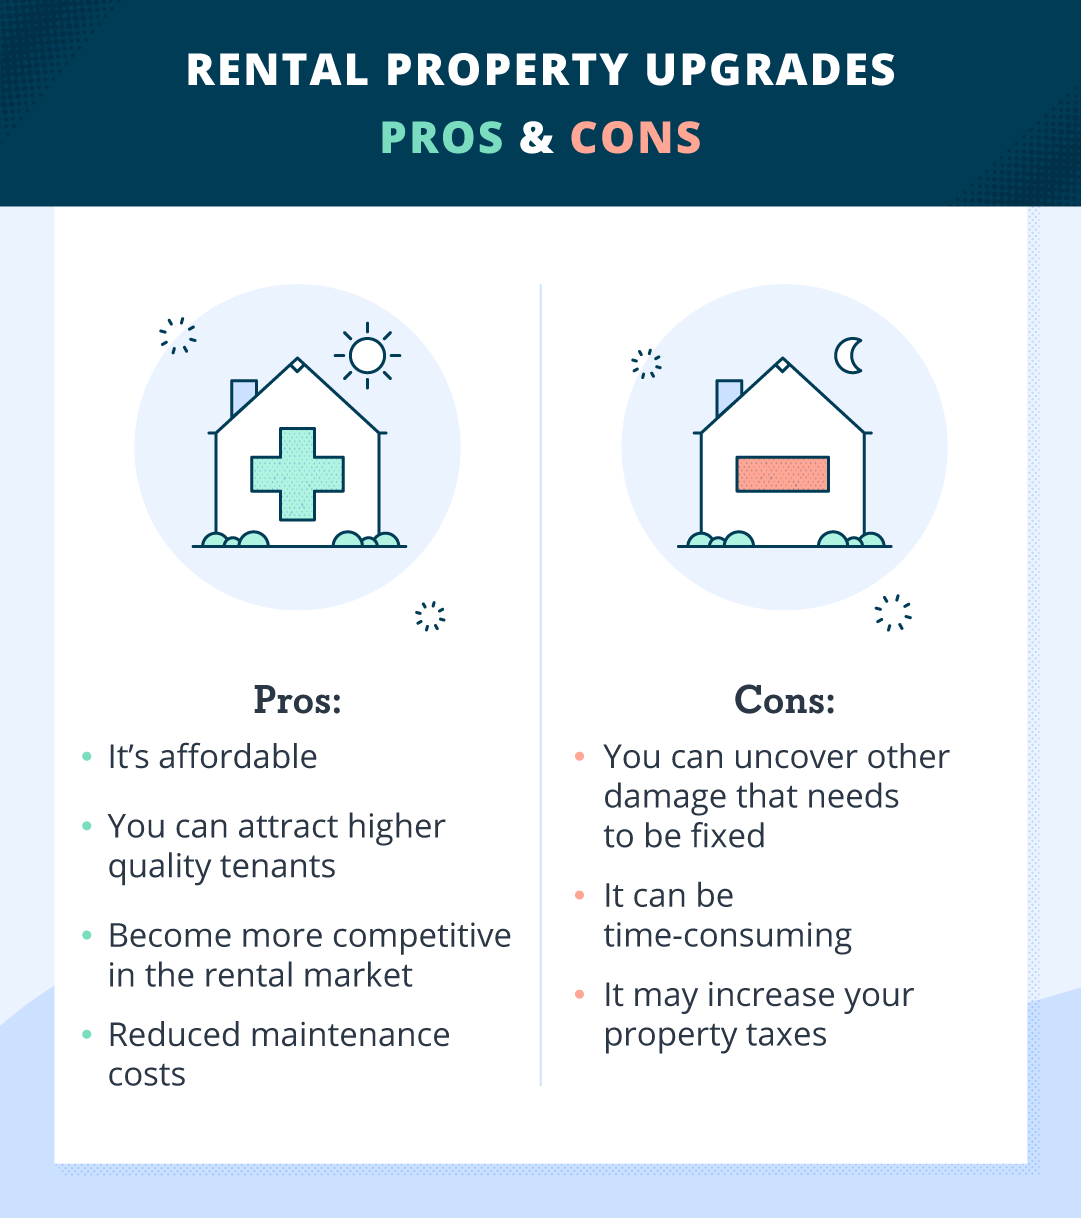 pros and cons of rental property upgrades